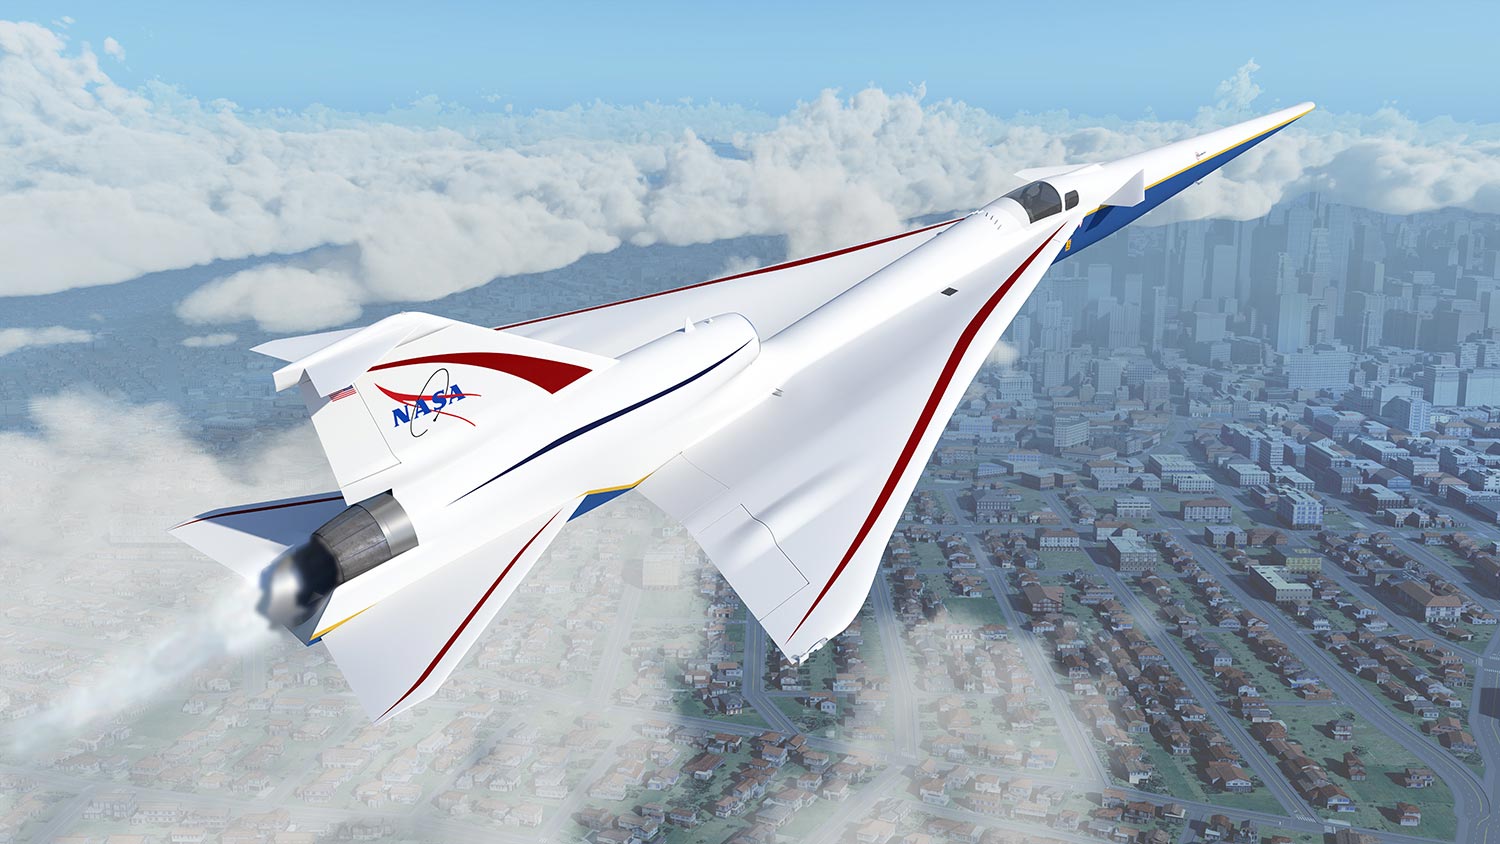 Jet Engine Installed on NASA’s X-59 QueSST Quiet Supersonic Aircraft | Tech News